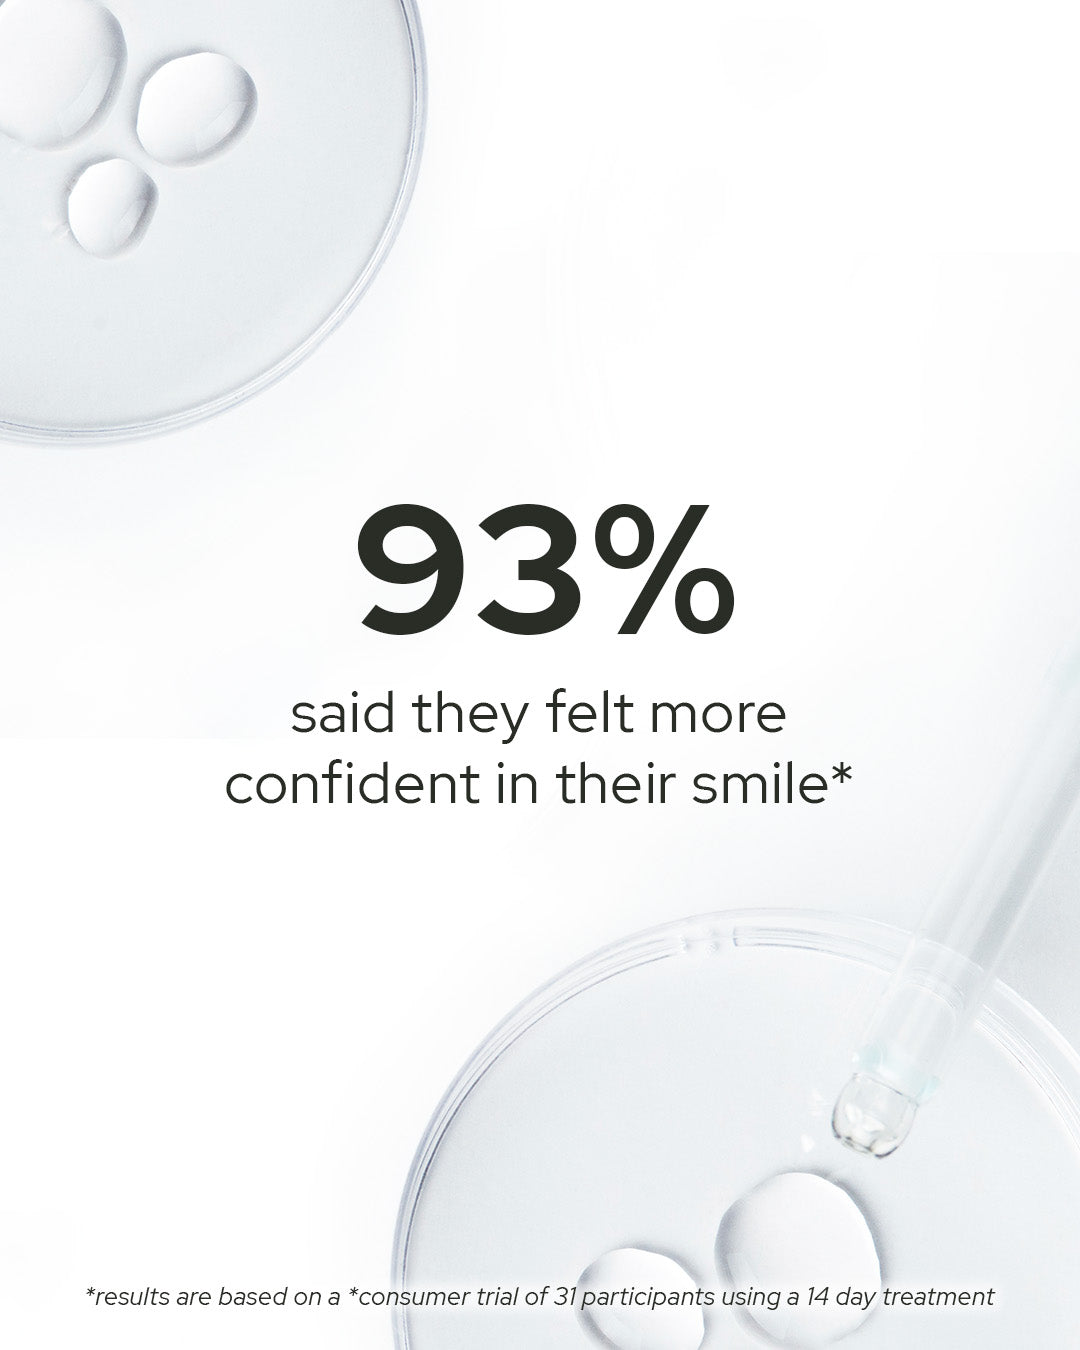 93% said they felt more confident in their smile